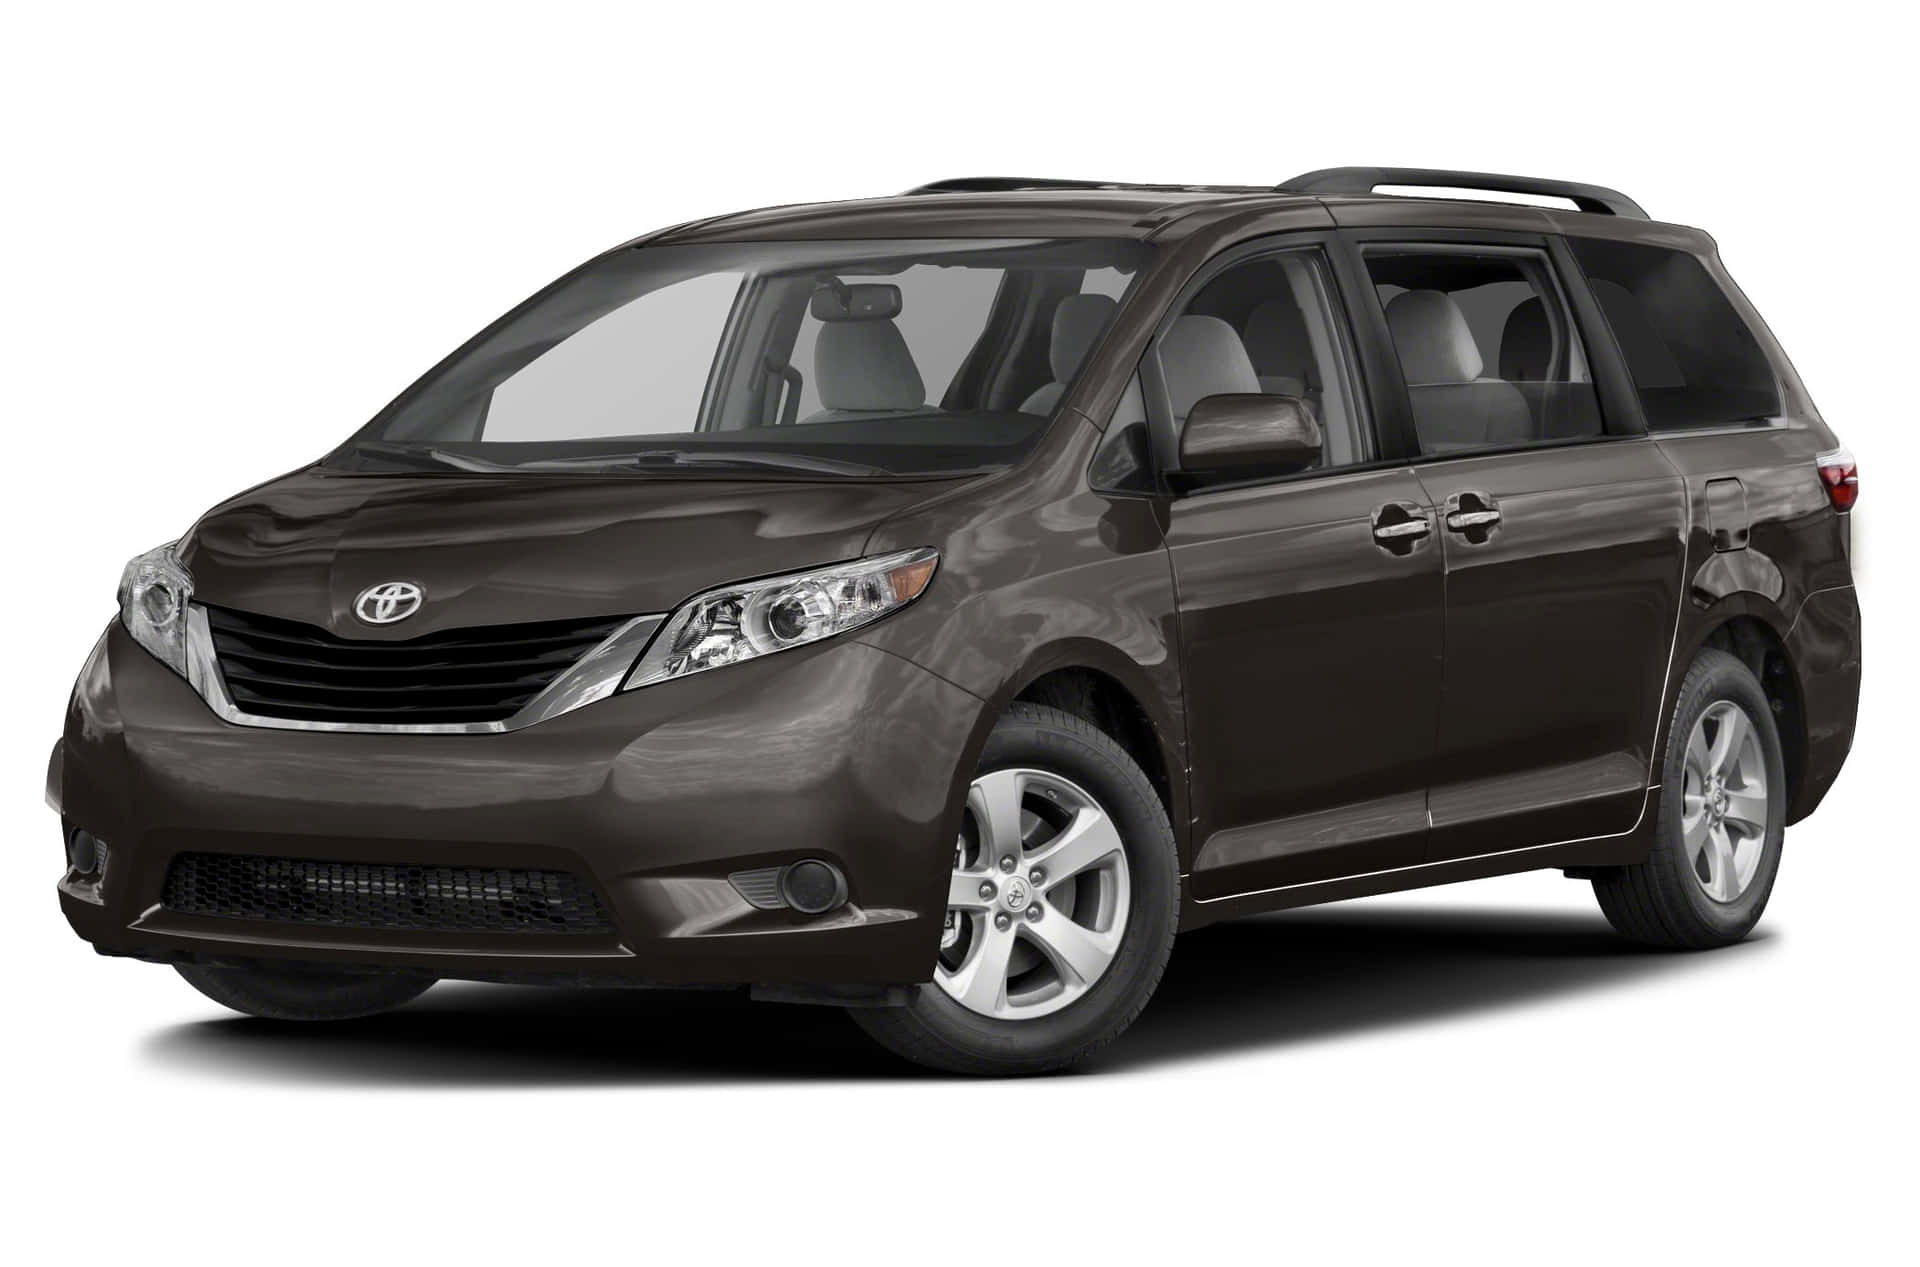 All-new Toyota Sienna In Scenic Mountain Backdrop. Wallpaper